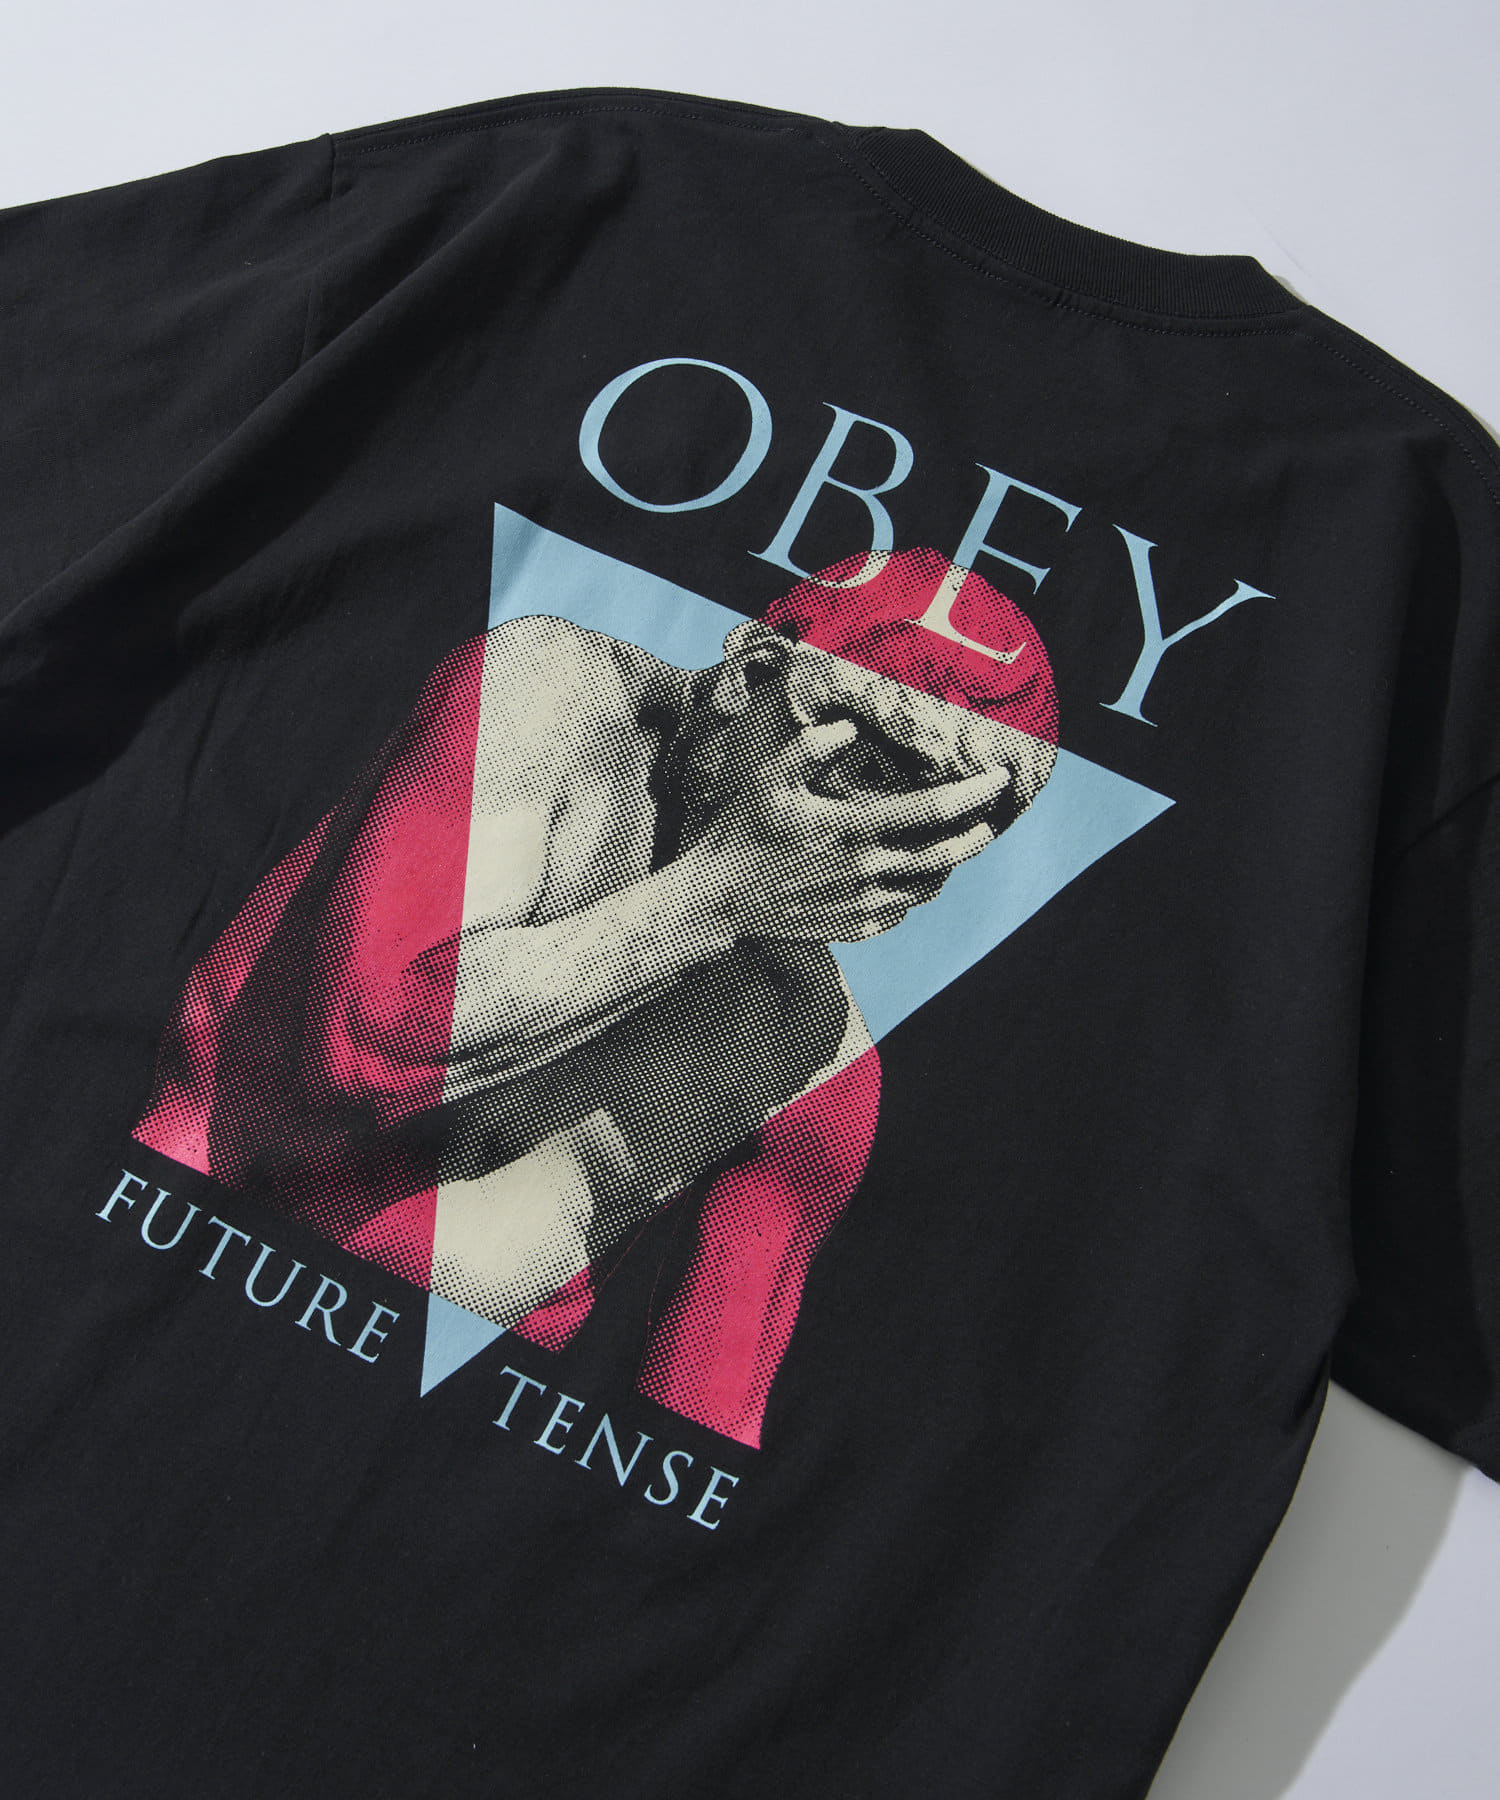 WHO’S WHO gallery(フーズフーギャラリー) 【OBEY】FUTURE TENSE